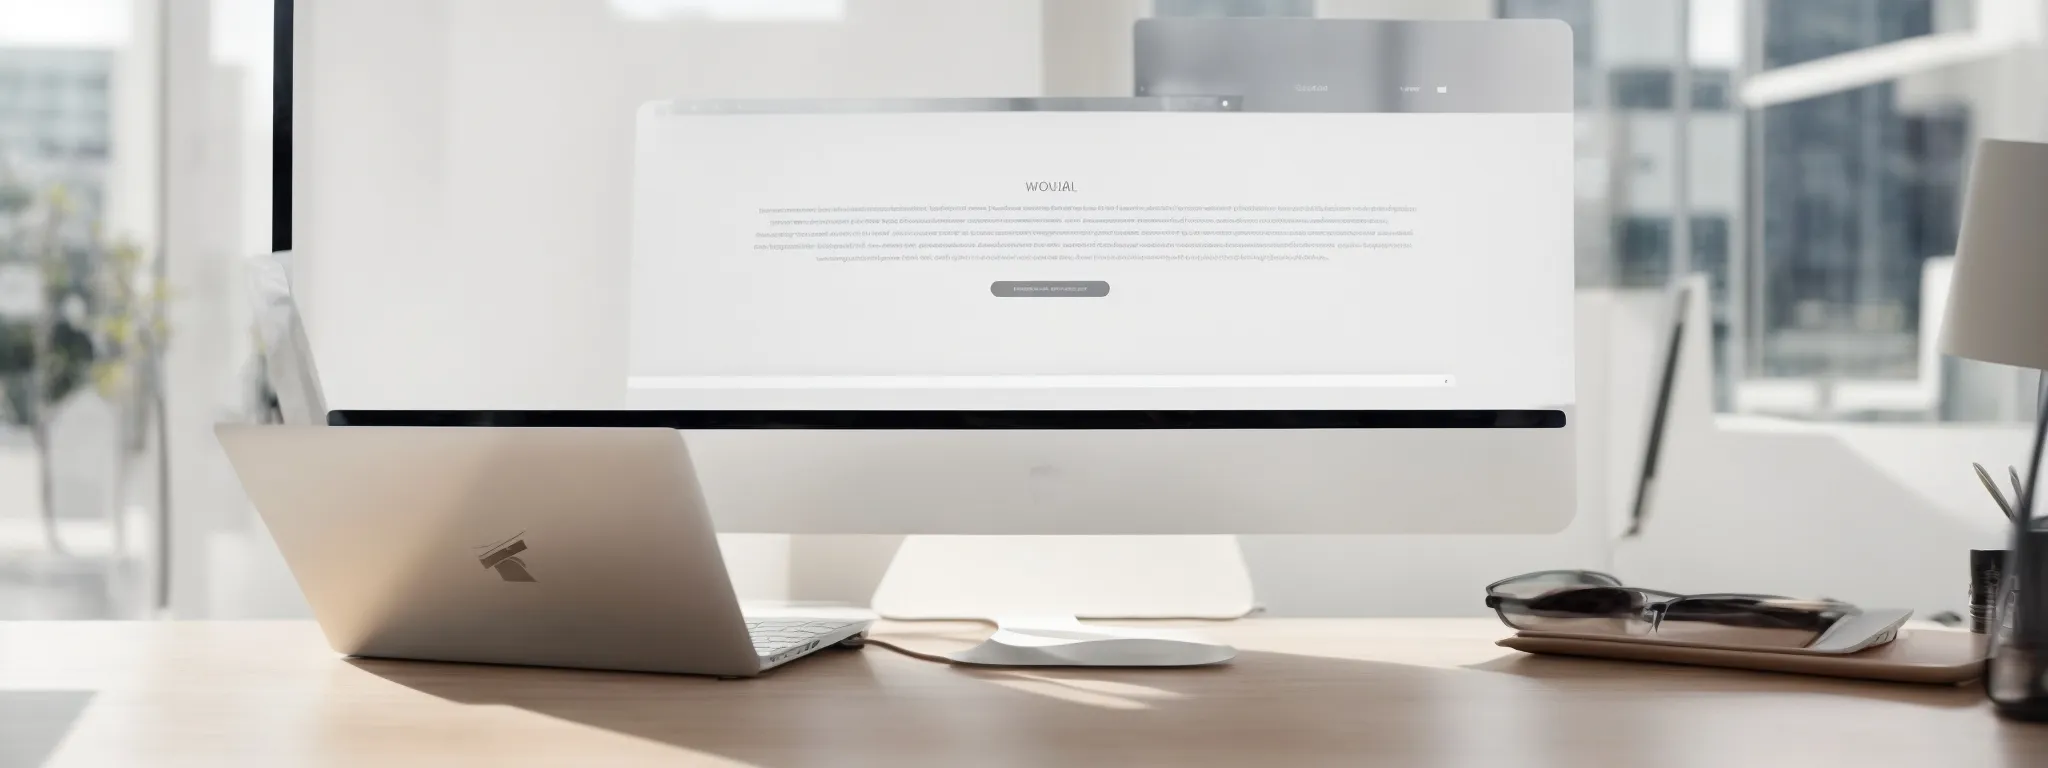 a sleek laptop displaying a modern, minimalist website layout against a clean, well-lit office space.